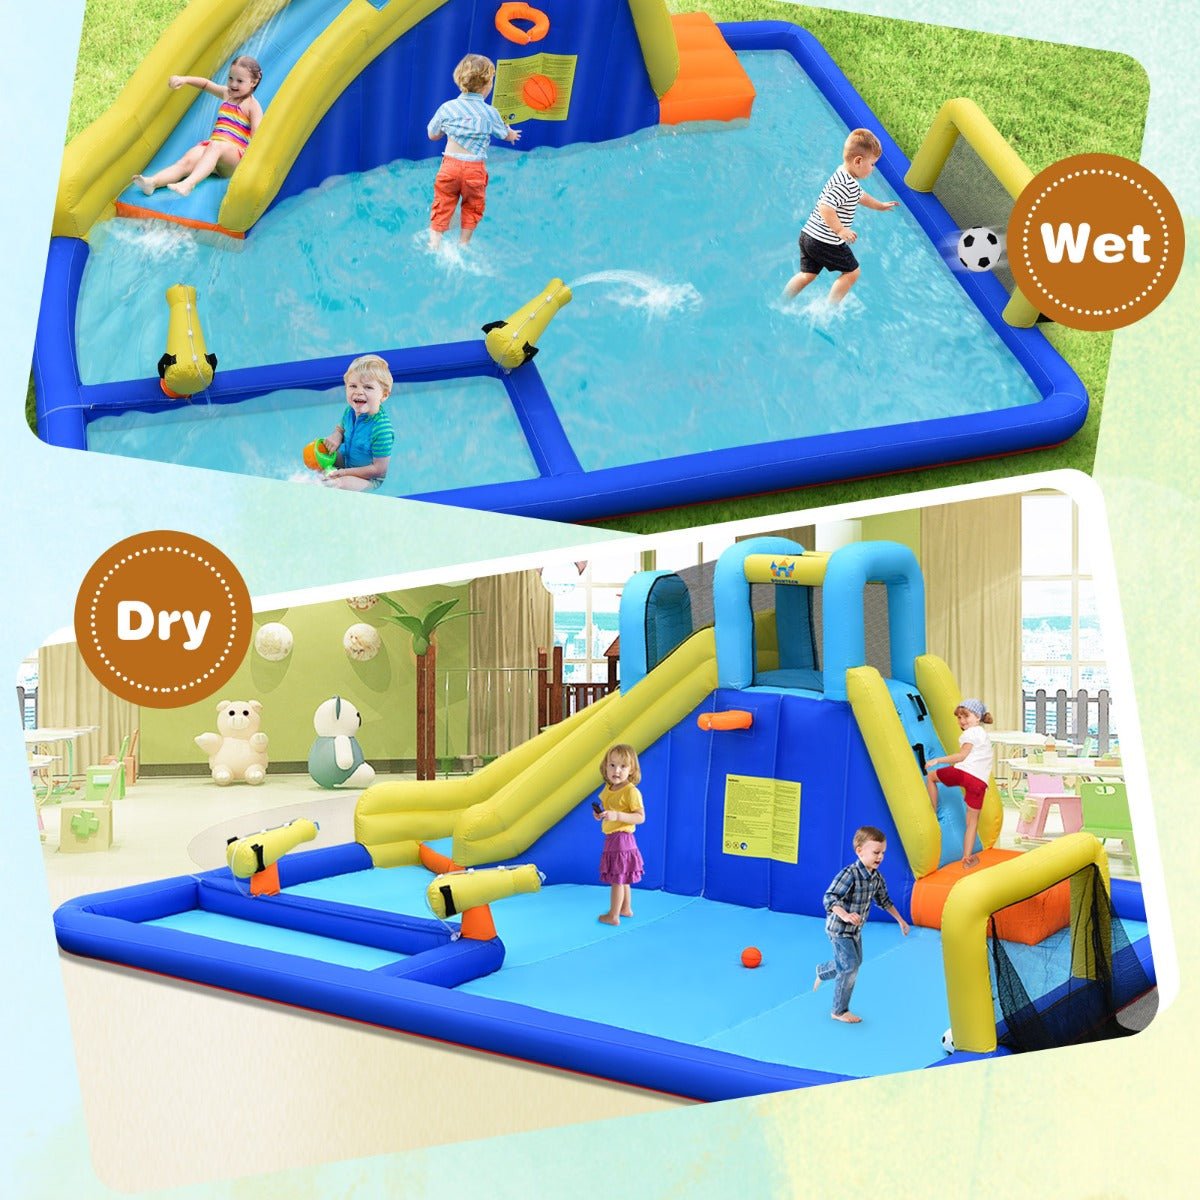 Outdoor Water Play Inflatable - Slide, Sprayers, and Active Playtime